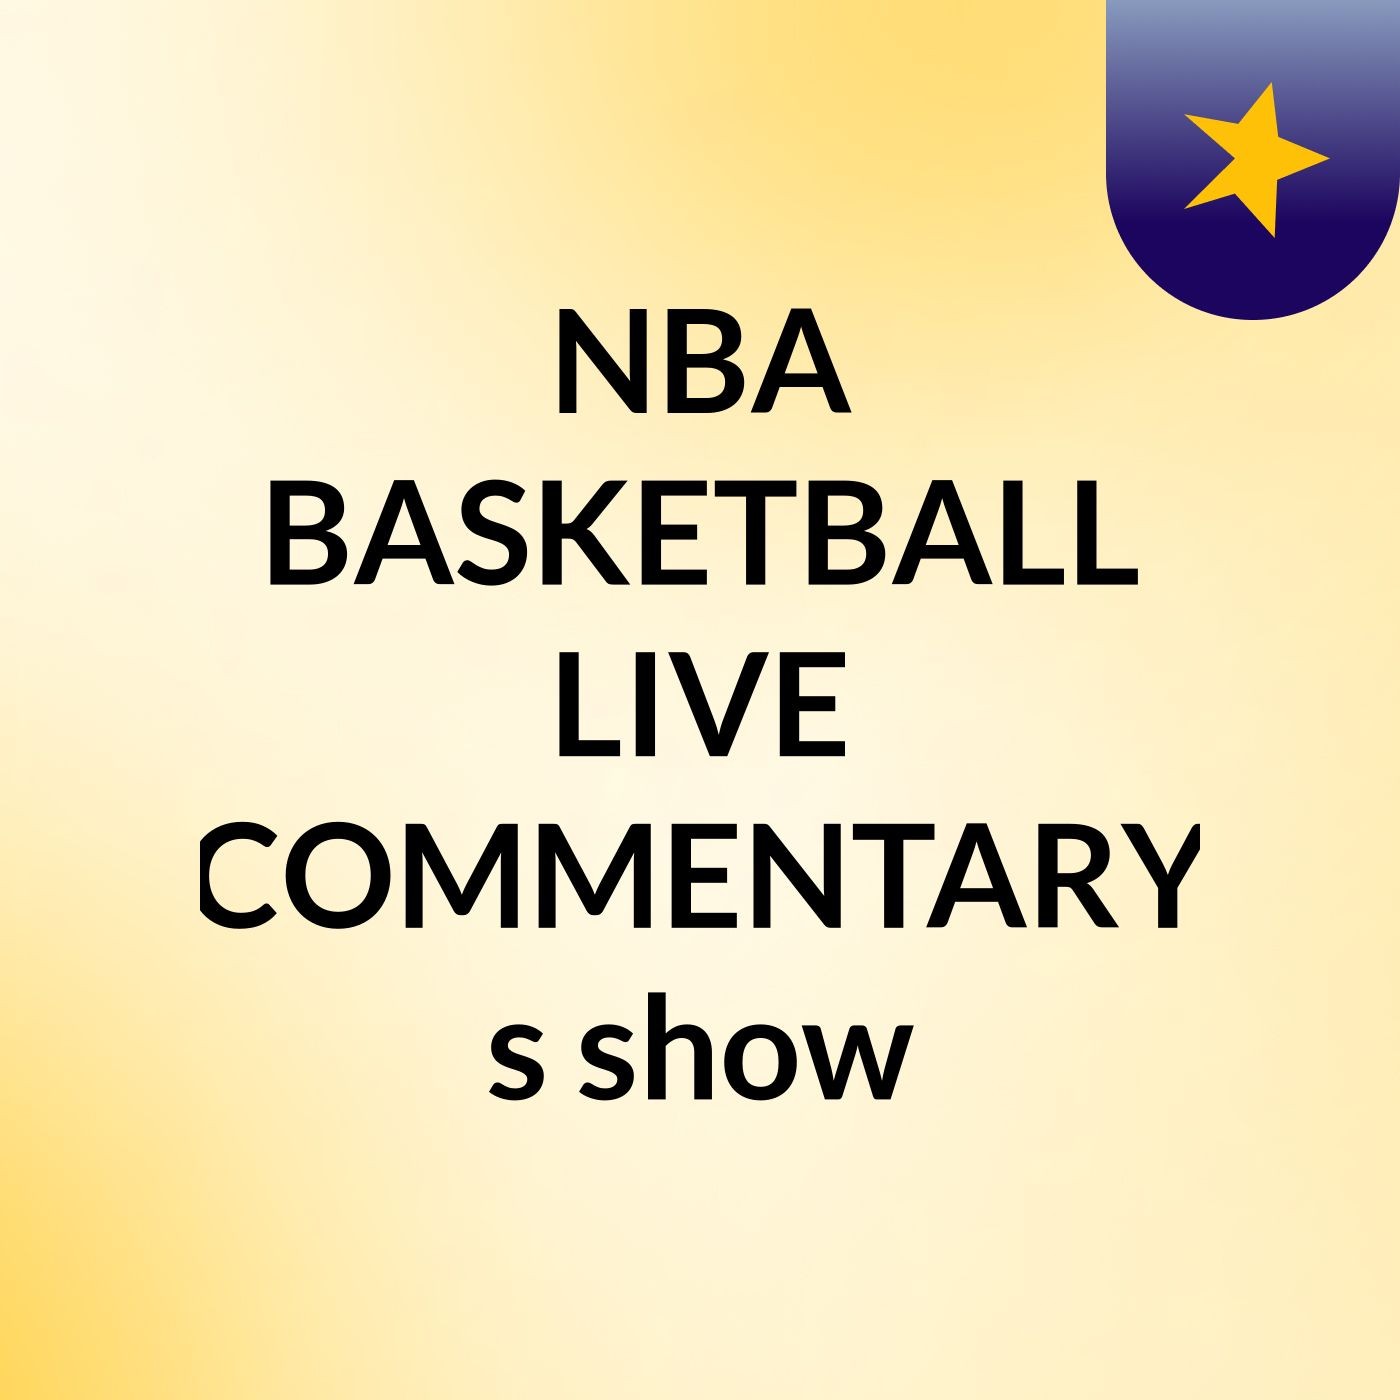 Episode 3 - NBA BASKETBALL LIVE COMMENTARY's show